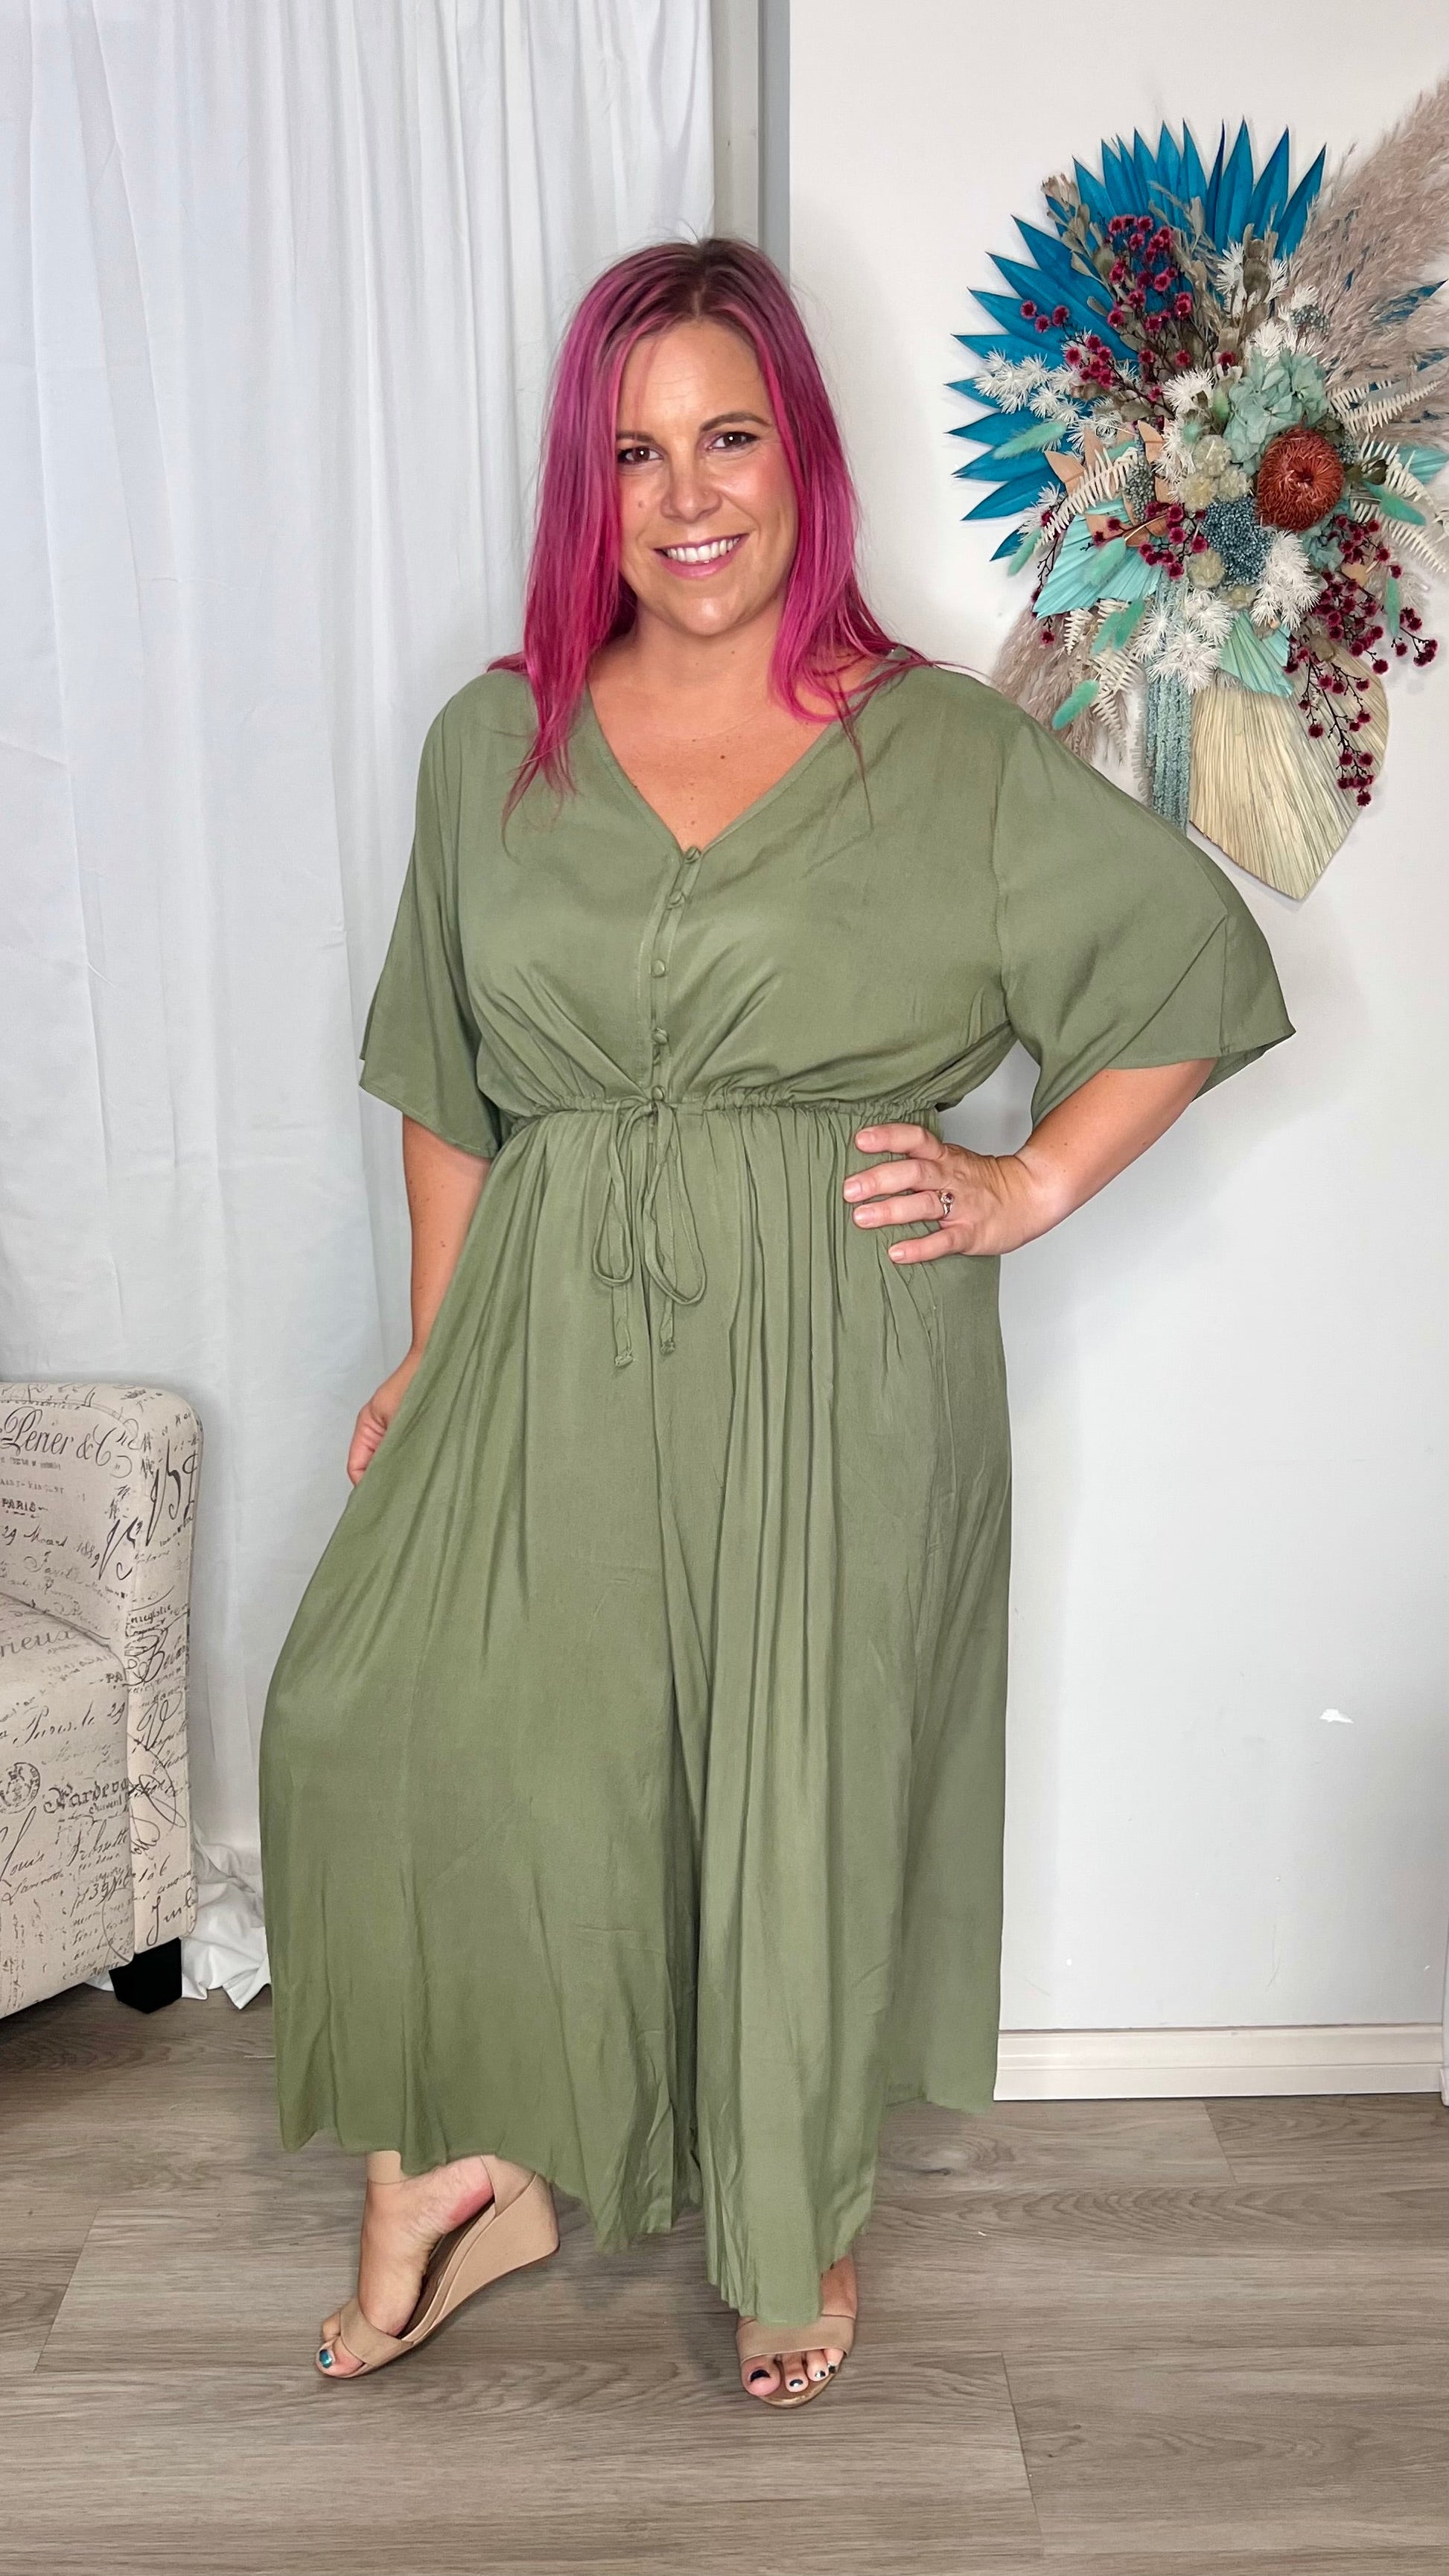 Morgan Jumpsuit - Khaki | Peach the Label | Super fun, super floaty and creates an instant one-item outfit! We love how easy to wear this jumpsuit is with its versatile fit - cinch it in as much or as little a